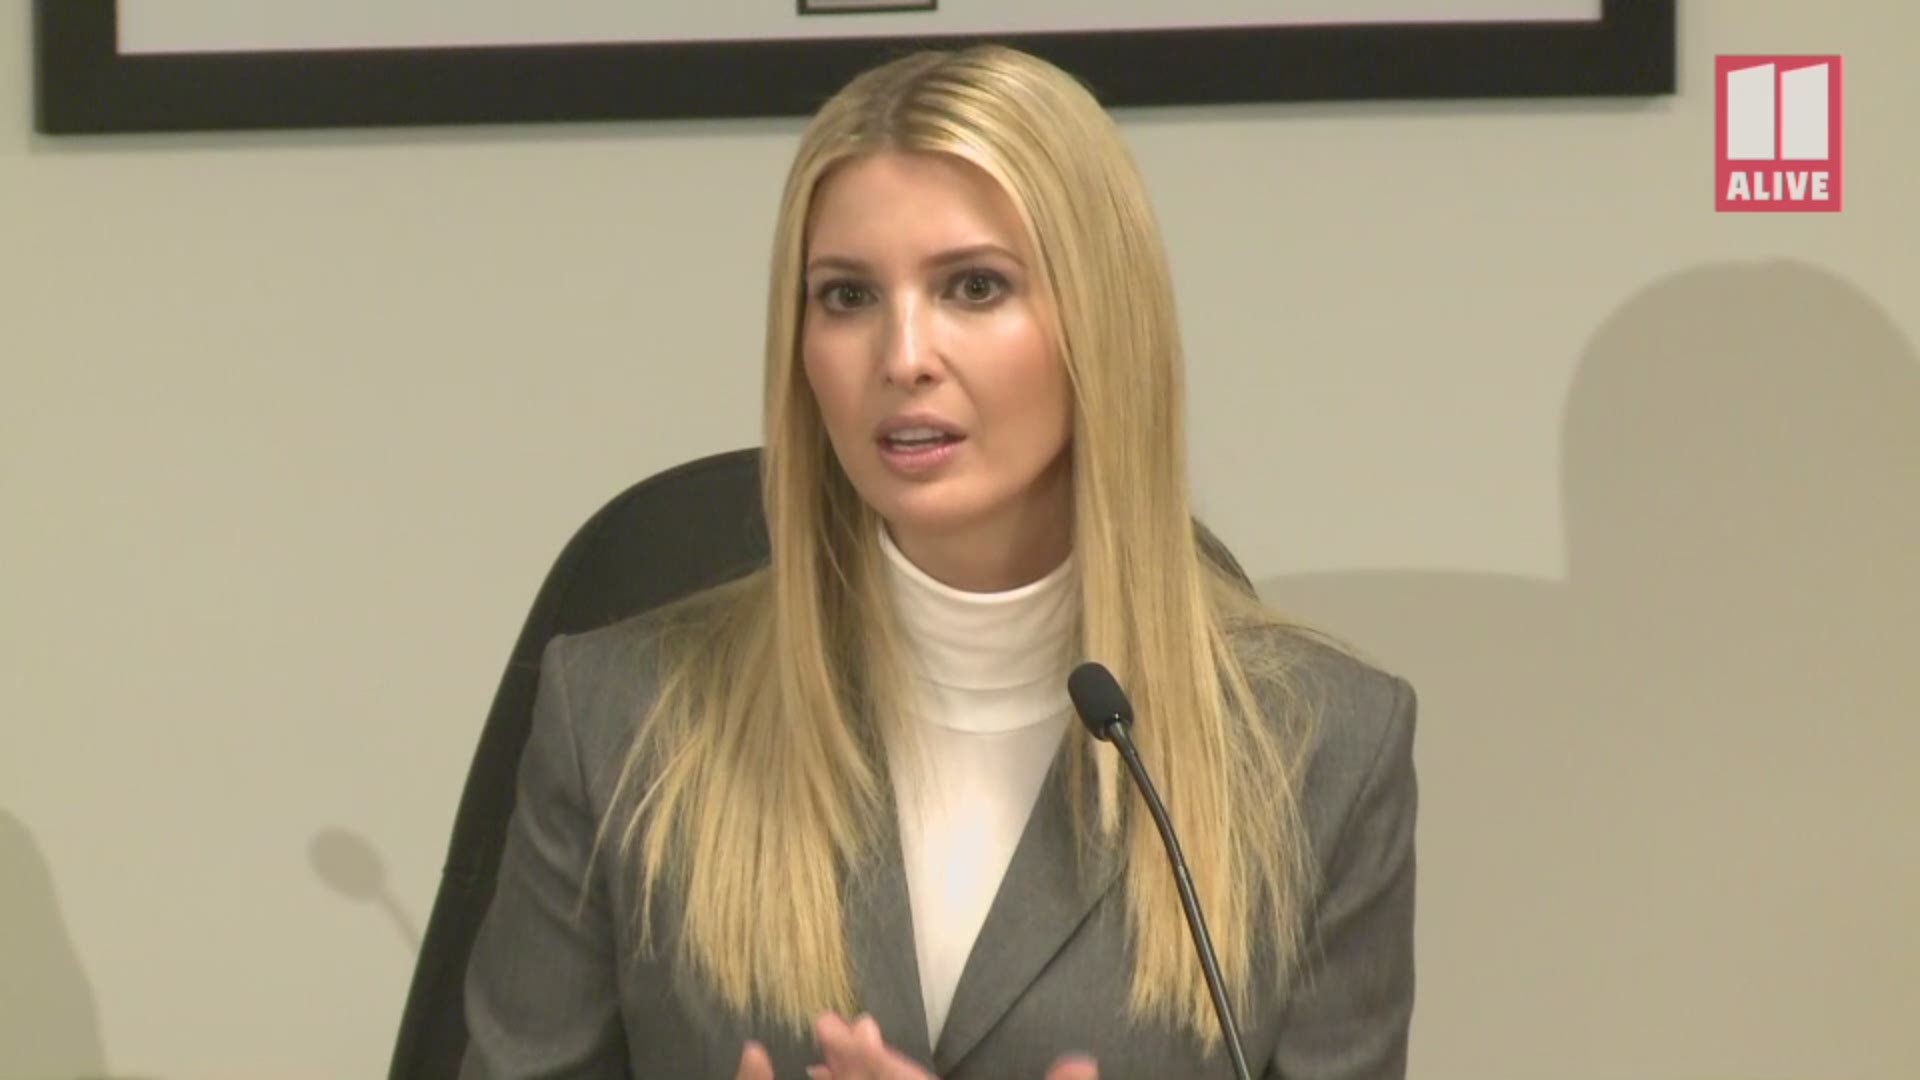 Presidential advisor Ivanka Trump visited a UPS training facility for a tour and a roundtable on workforce development with Georgia Gov. Brian Kemp on Wednesday, Feb. 20, 2019.